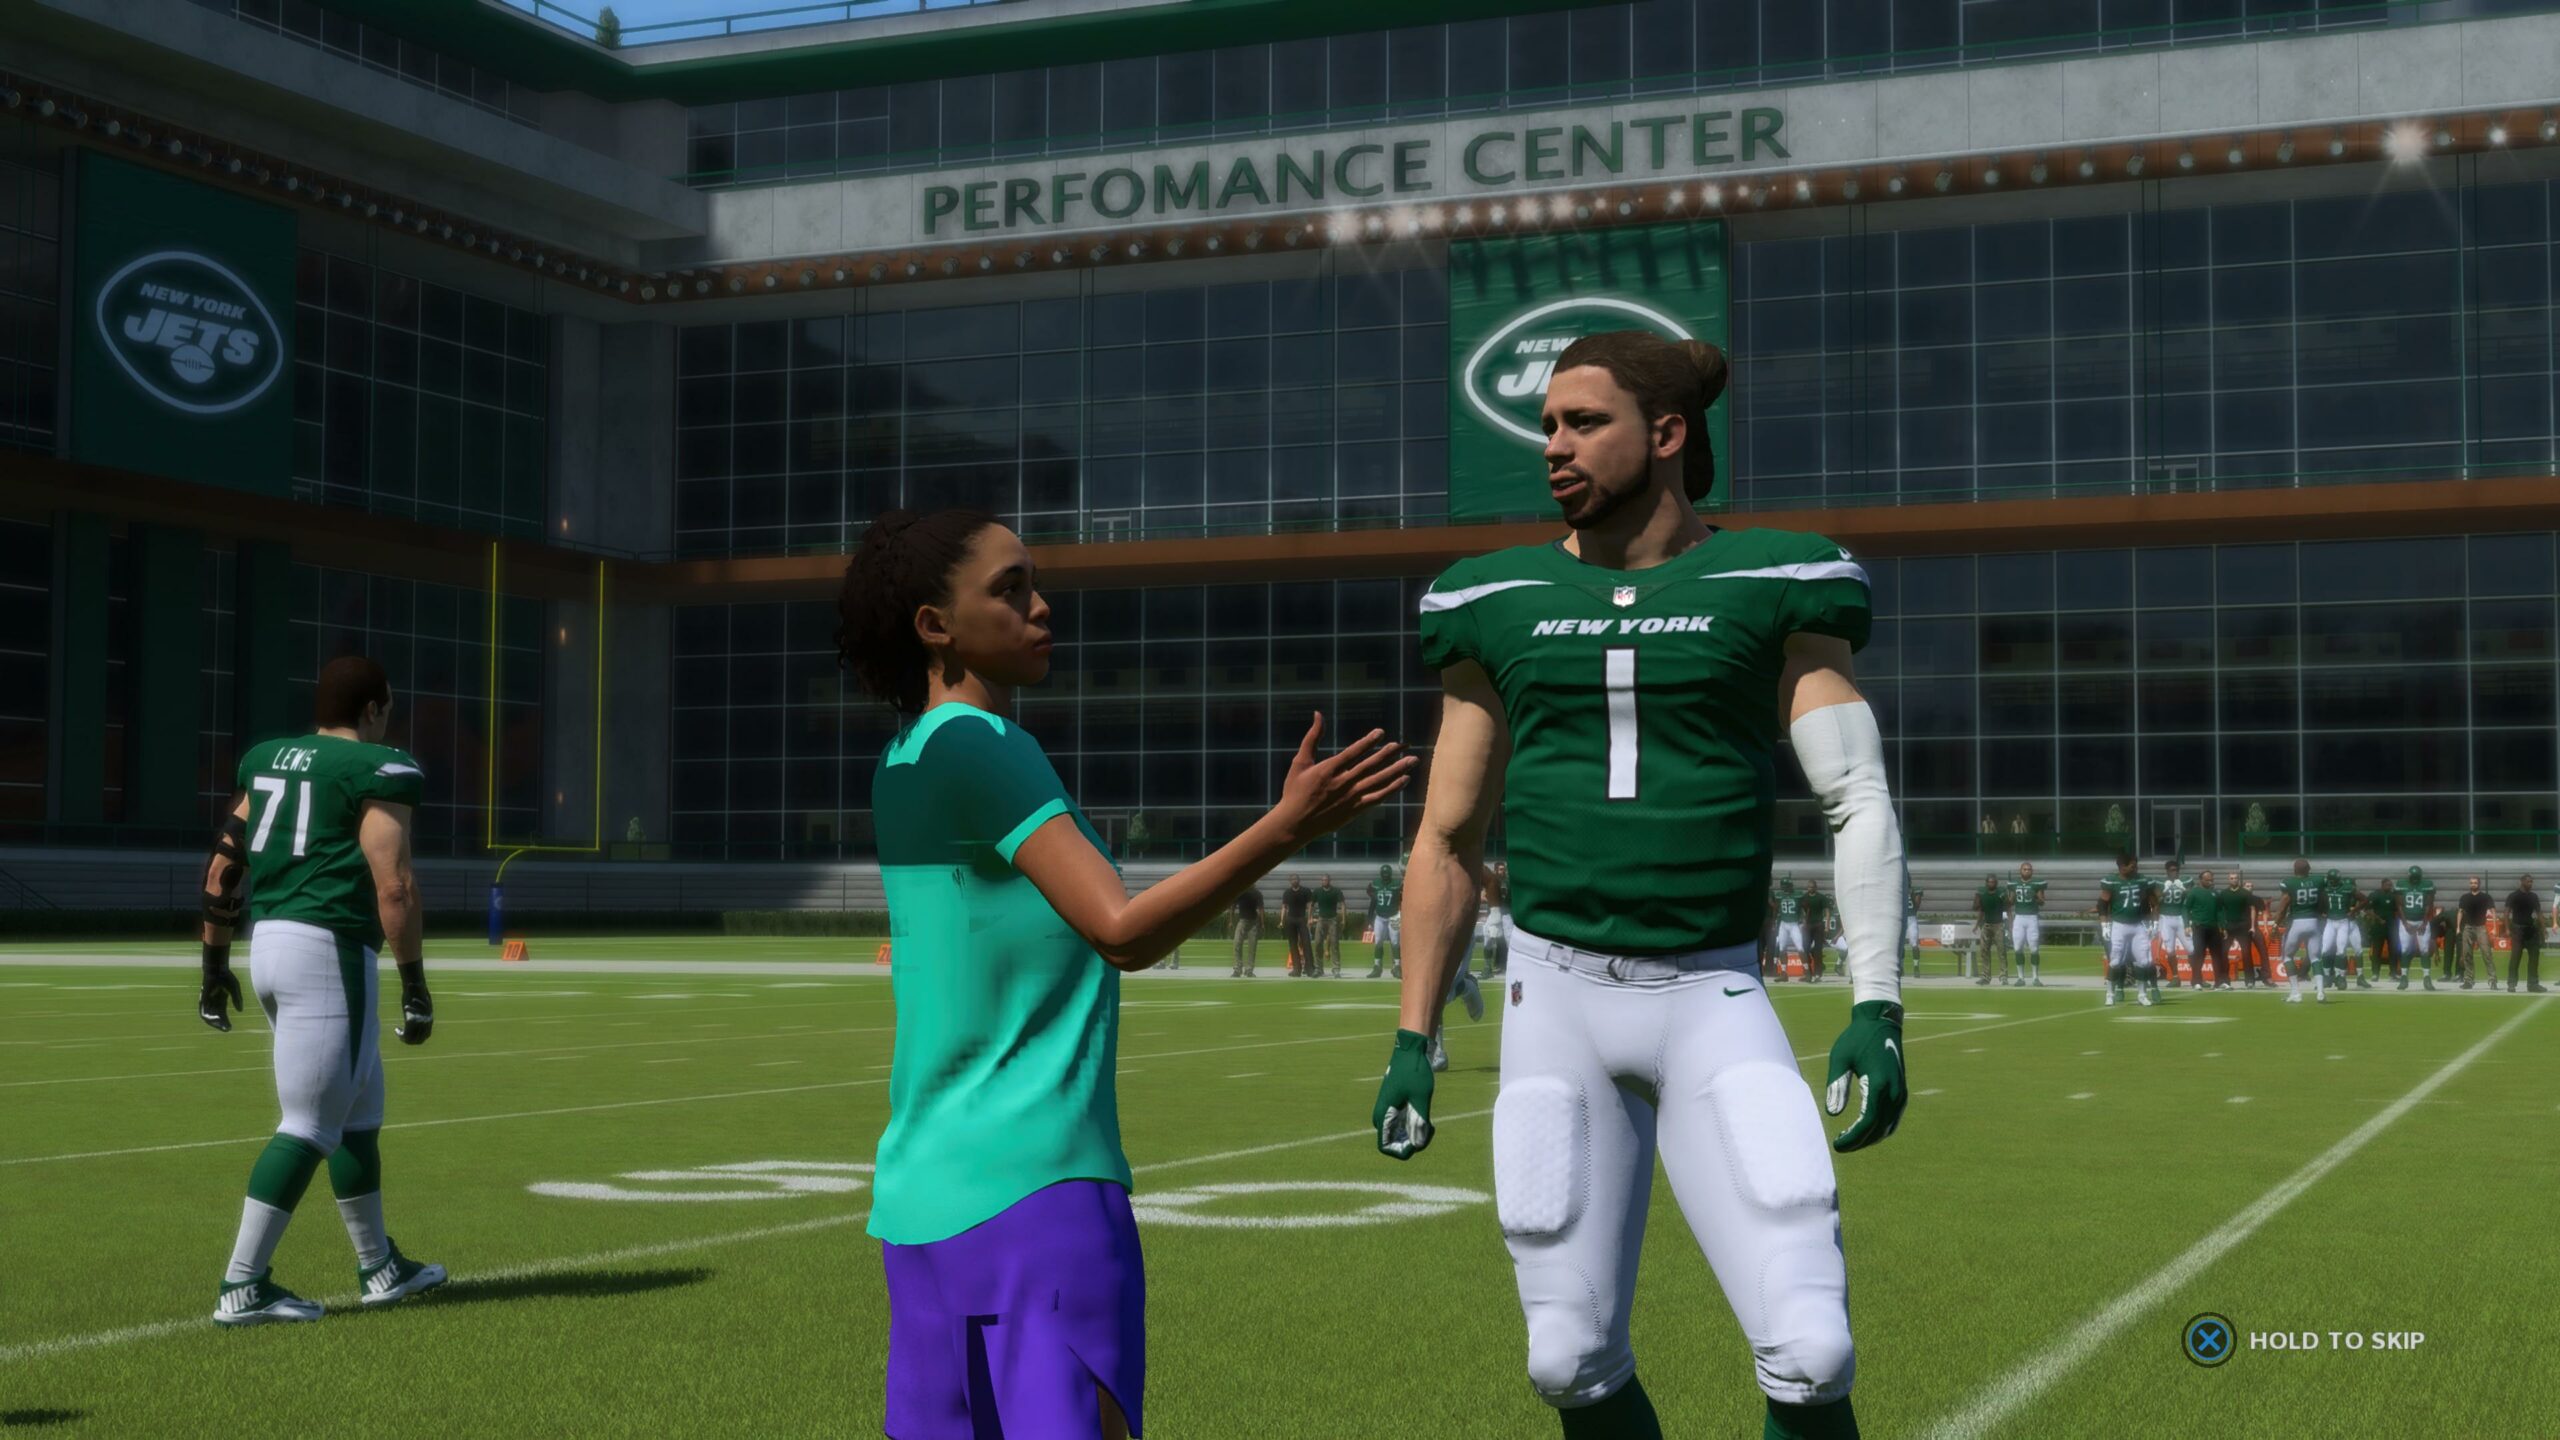 new to madden 22